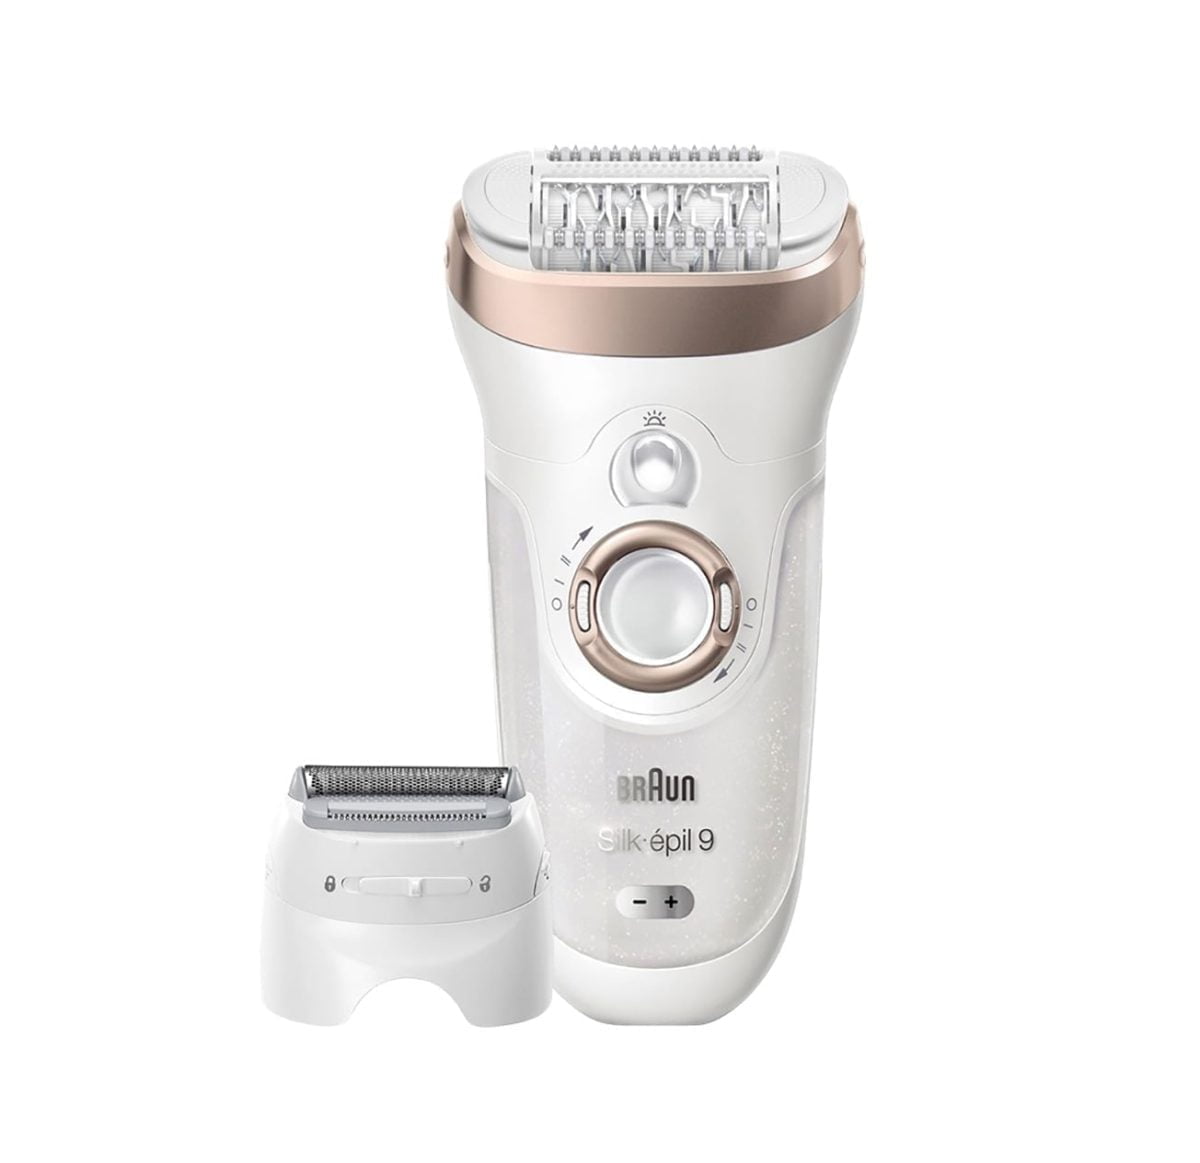 Tns Se 9561 Braun Silk Epil 9 9 561 Wet Dry Cordless Epilator Gold 15623399170 Braun &Amp;Lt;H1&Amp;Gt;Braun Silk-Épil 9 9-561 Wet &Amp;Amp; Dry Cordless Epilator/Epilation + 6 Extras&Amp;Lt;/H1&Amp;Gt; Https://Www.youtube.com/Watch?V=Mdrhywfkply &Amp;Lt;Ul Class=&Amp;Quot;A-Unordered-List A-Vertical A-Spacing-Mini&Amp;Quot;&Amp;Gt; &Amp;Lt;Li&Amp;Gt;&Amp;Lt;Span Class=&Amp;Quot;A-List-Item&Amp;Quot;&Amp;Gt; Epilator Removes More Hair In One Stroke* &Amp;Lt;/Span&Amp;Gt;&Amp;Lt;/Li&Amp;Gt; &Amp;Lt;Li&Amp;Gt;&Amp;Lt;Span Class=&Amp;Quot;A-List-Item&Amp;Quot;&Amp;Gt; Epilation Removes Hair 4X Shorter Than Wax &Amp;Lt;/Span&Amp;Gt;&Amp;Lt;/Li&Amp;Gt; &Amp;Lt;Li&Amp;Gt;&Amp;Lt;Span Class=&Amp;Quot;A-List-Item&Amp;Quot;&Amp;Gt; Wet &Amp;Amp; Dry Epilation - Virtually Painless With Regular Use &Amp;Lt;/Span&Amp;Gt;&Amp;Lt;/Li&Amp;Gt; &Amp;Lt;Li&Amp;Gt;&Amp;Lt;Span Class=&Amp;Quot;A-List-Item&Amp;Quot;&Amp;Gt; 6 Extras, Including Shaver Head And Trimmer Cap &Amp;Lt;/Span&Amp;Gt;&Amp;Lt;/Li&Amp;Gt; &Amp;Lt;/Ul&Amp;Gt; Braun Silk-Épil 9 9-561 Braun Silk-Épil 9 9-561 Wet And Dry Cordless Epilator+ 6 Extras